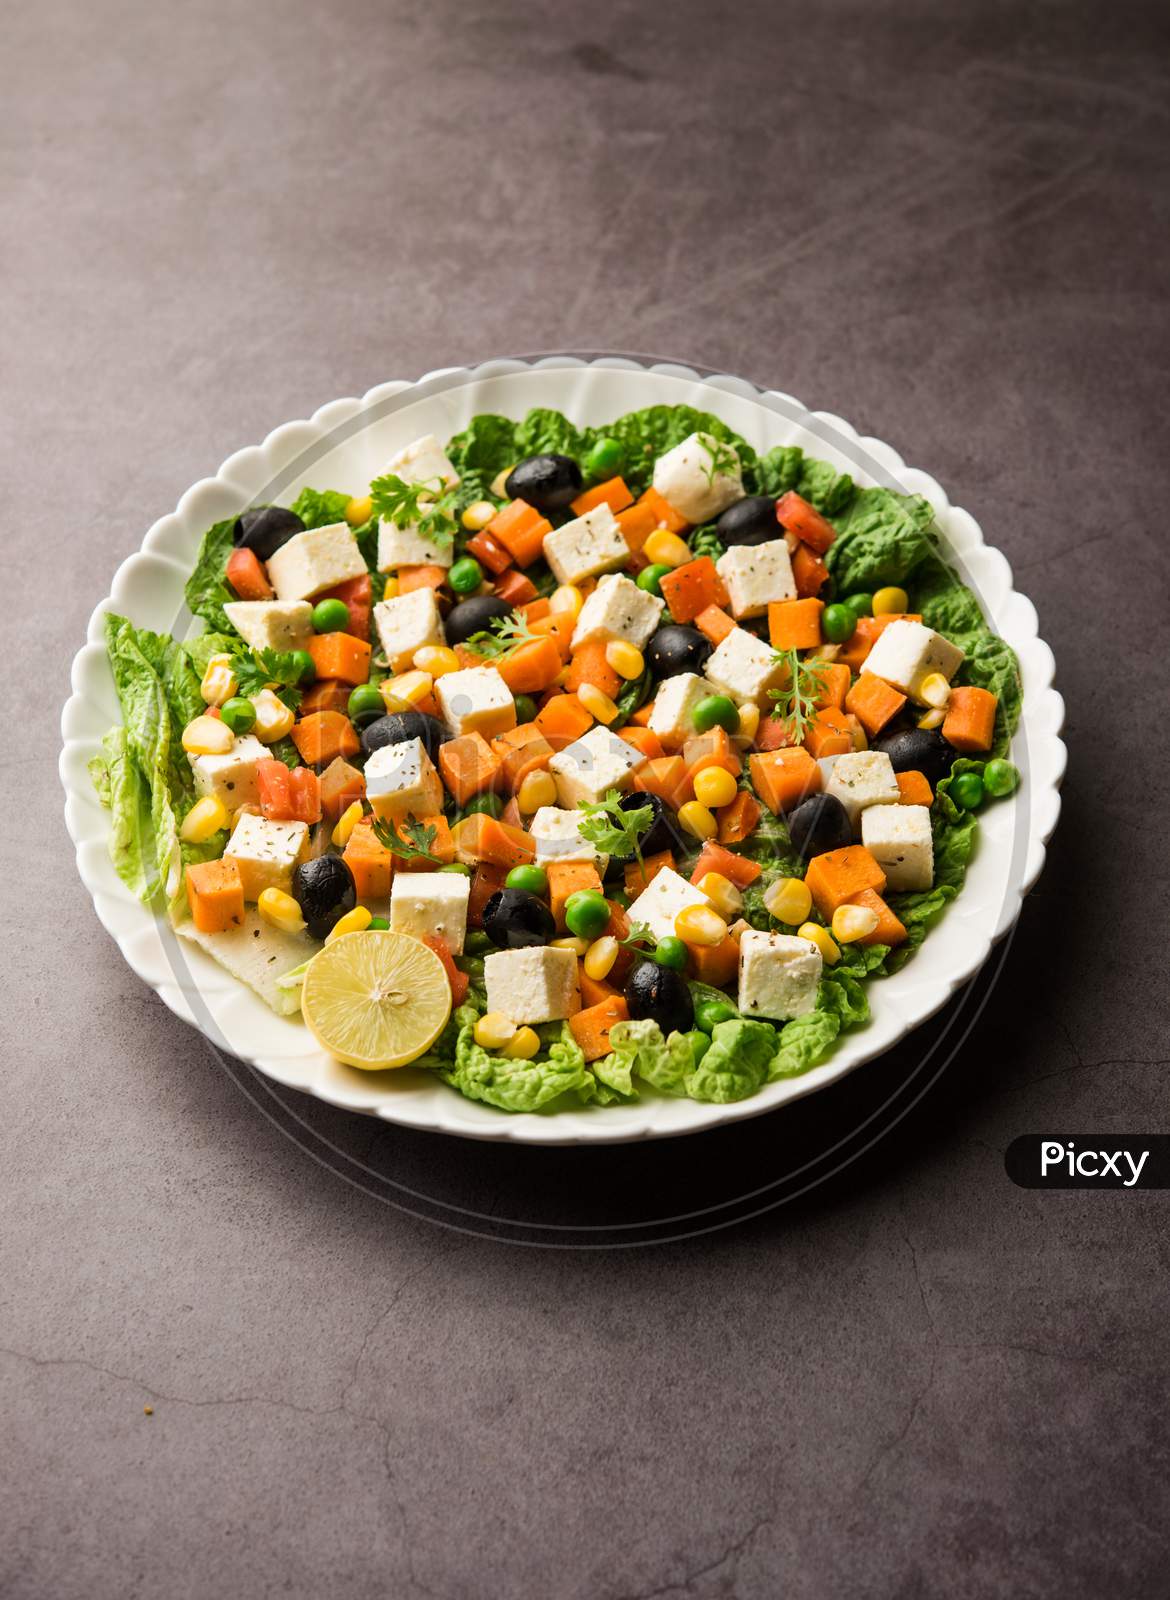 Paneer Vegetable Salad Is A Healthy Indian Recipe Made Using Cottage Cheese And Green Veggies